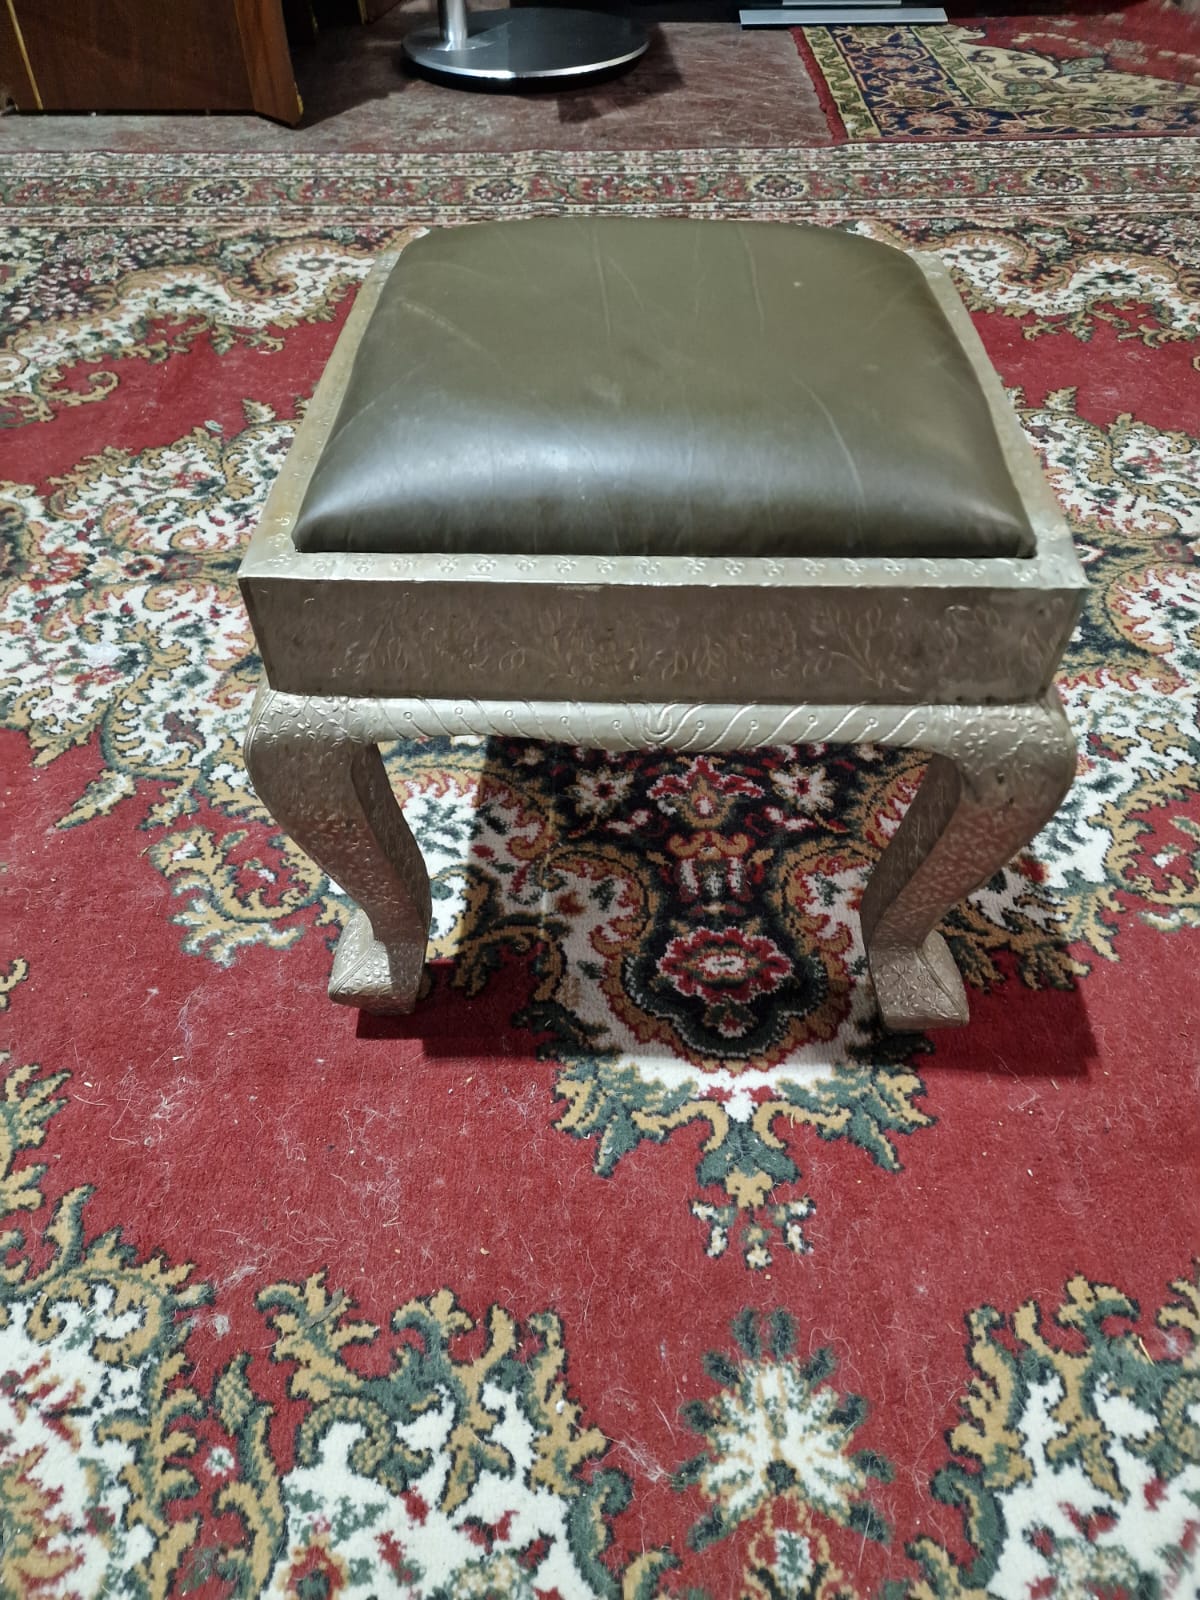 Dowry Chair And Footstool A Striking Vintage Anglo-Indian Silvered Metal-Clad Chair, 20th Century, - Image 5 of 16